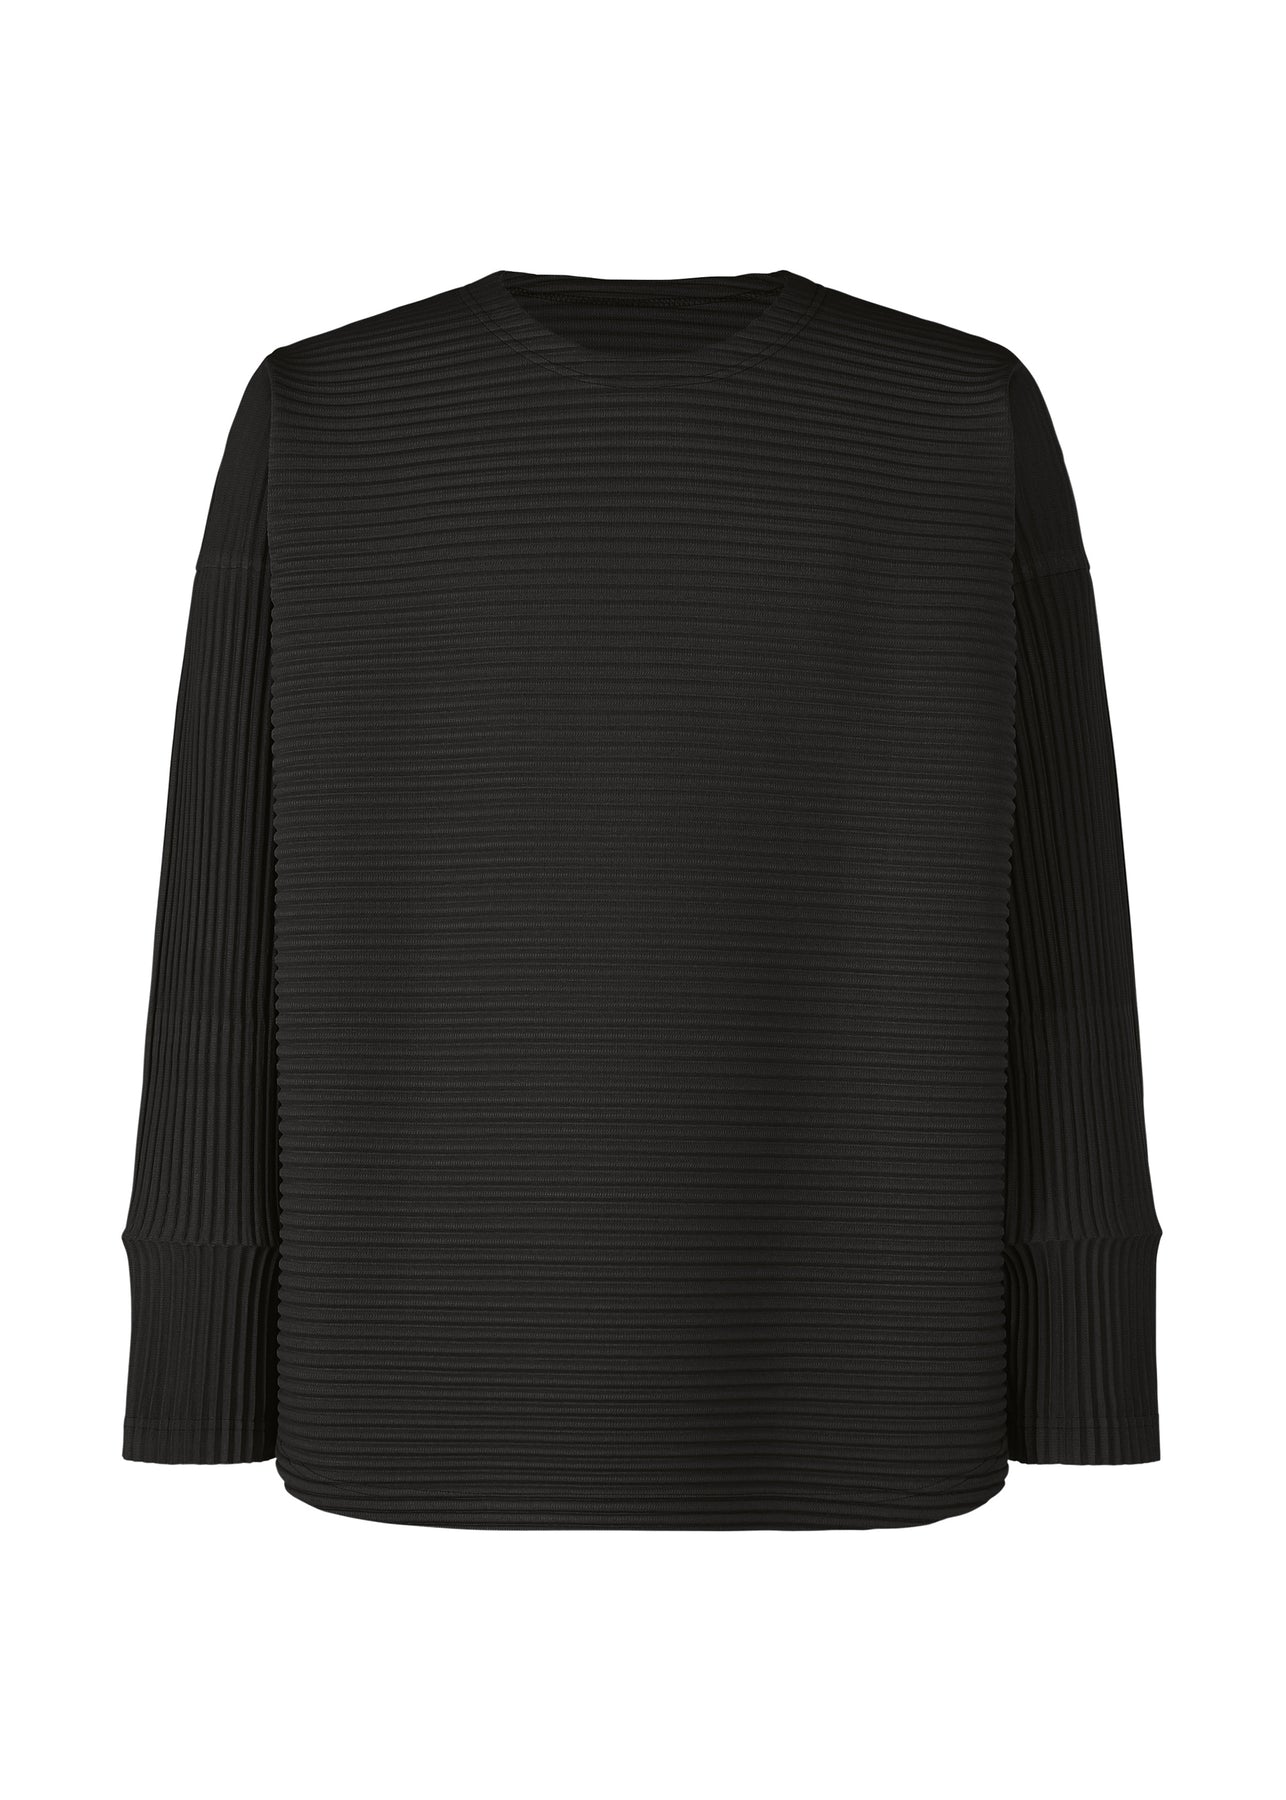 HORIZON PLEATS 2 T-SHIRT | The official ISSEY MIYAKE ONLINE STORE 